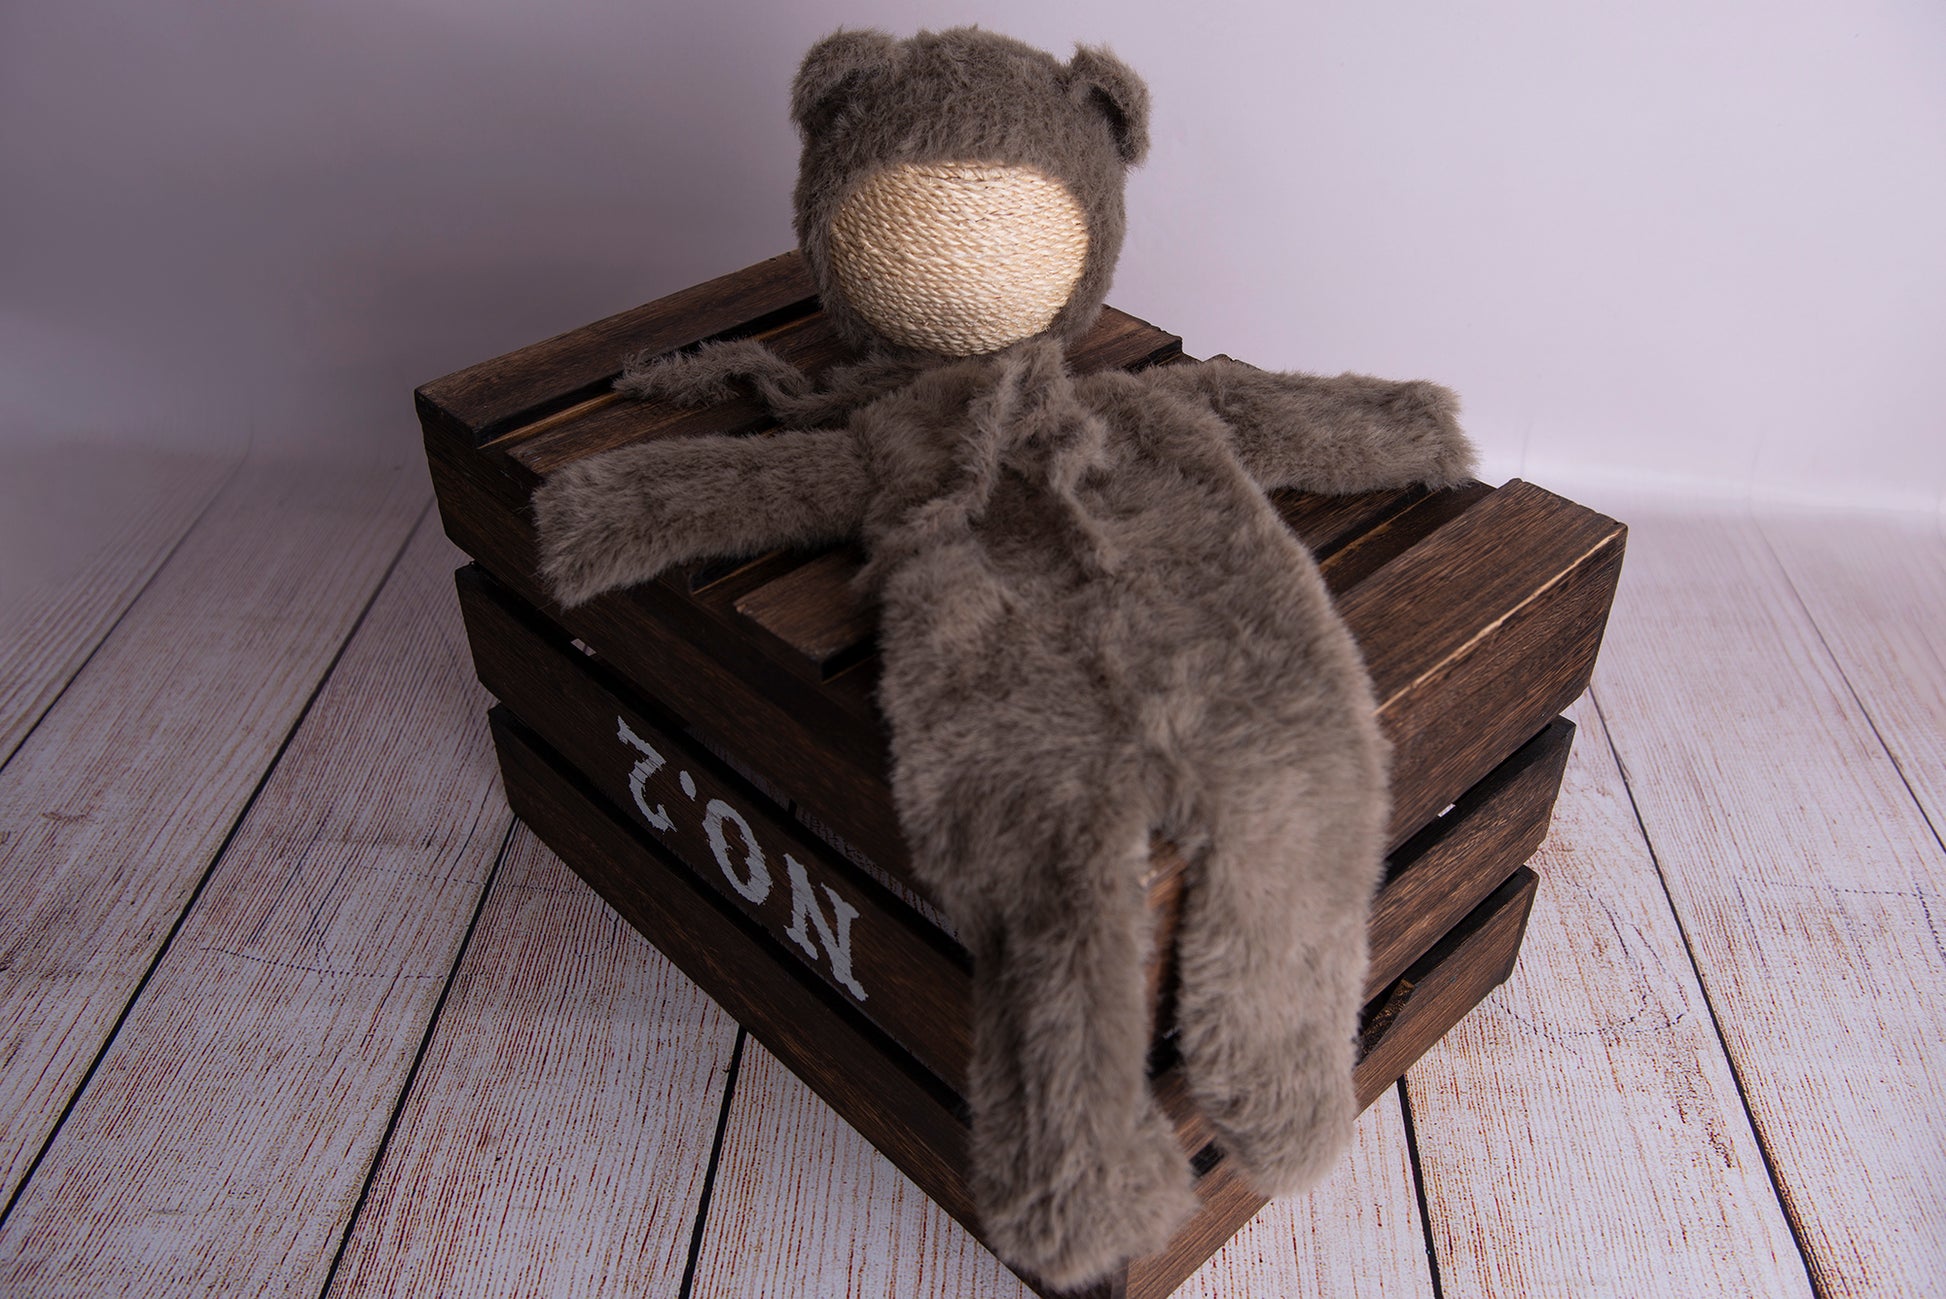 Newborn photography clothing of a bear bonnet and suit in nut brown on a wooden crate.